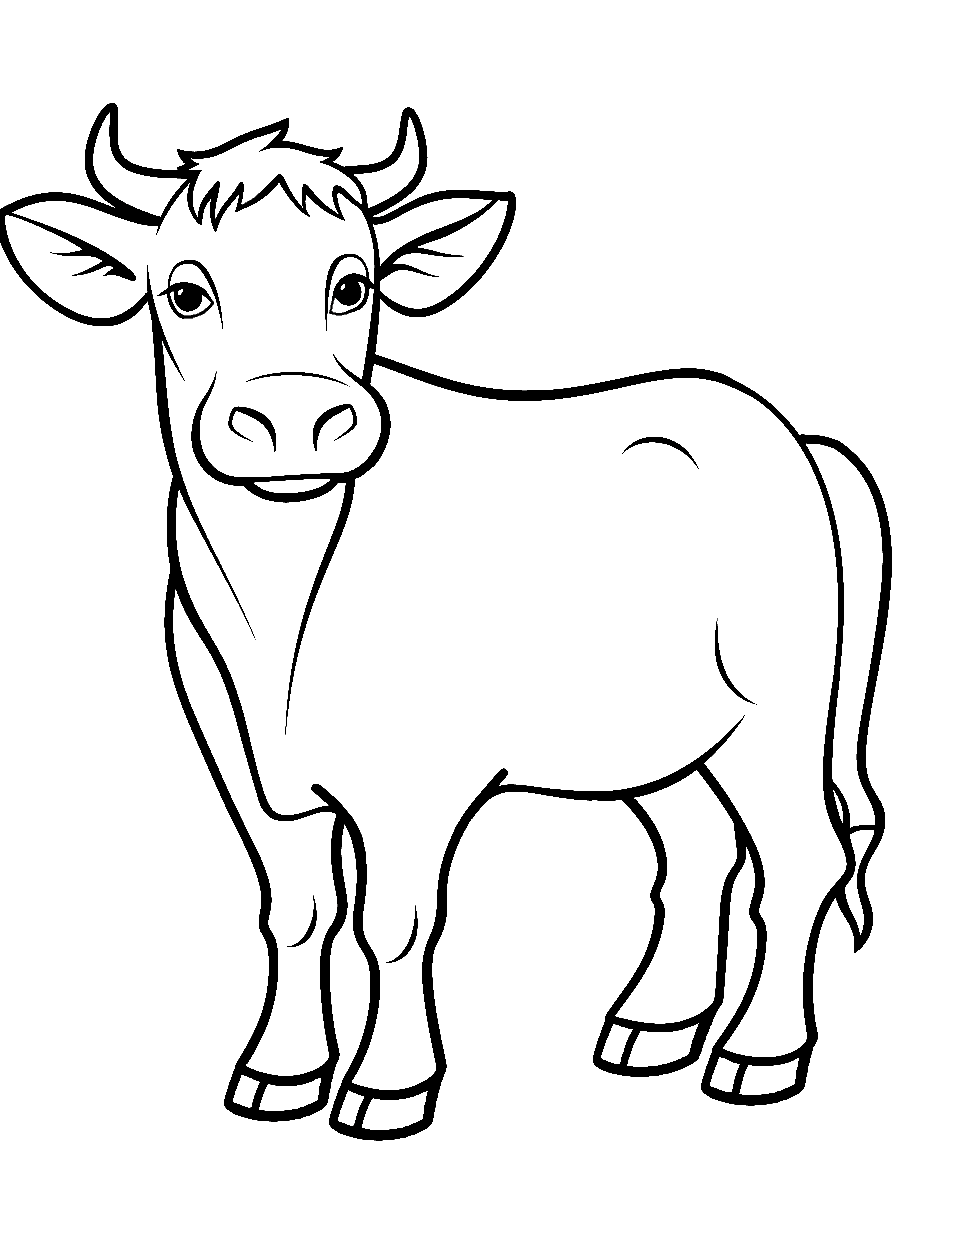 35 Cow Coloring Pages: Free Printable Sheets